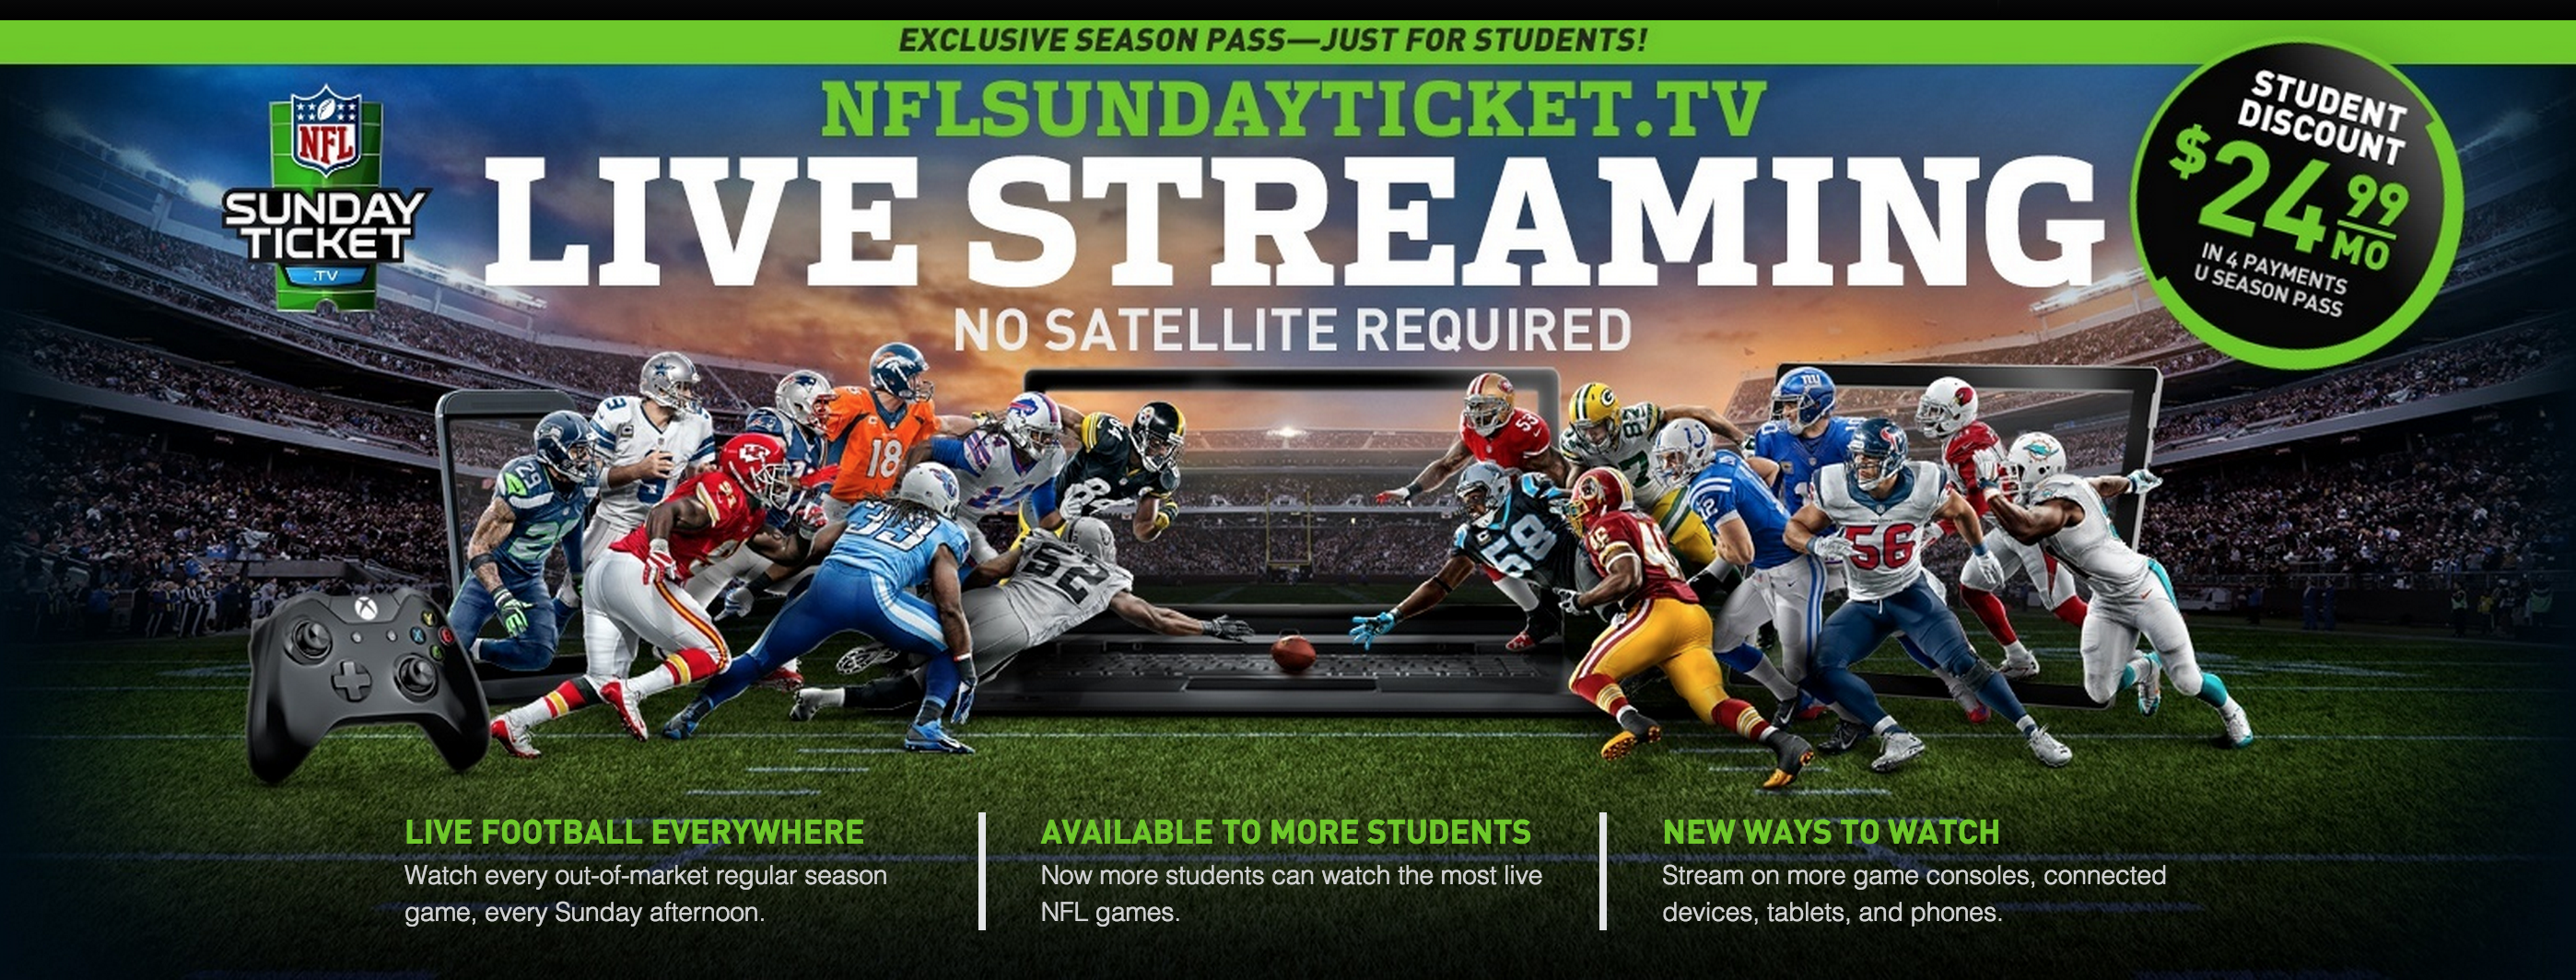 watch nfl without directv